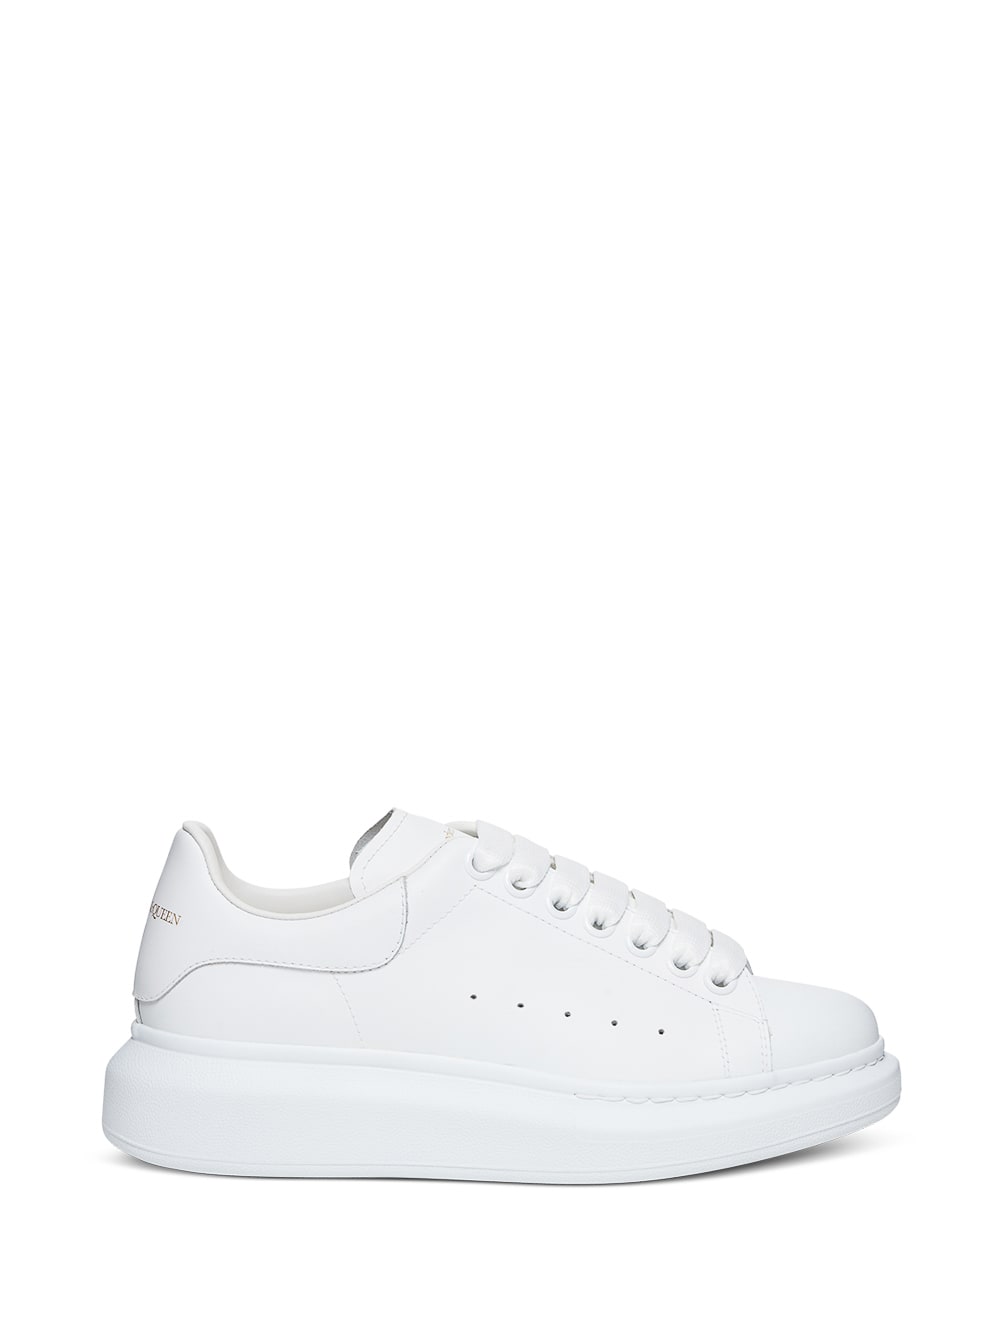 Alexander McQueen White Leather Big Sole Sneakers